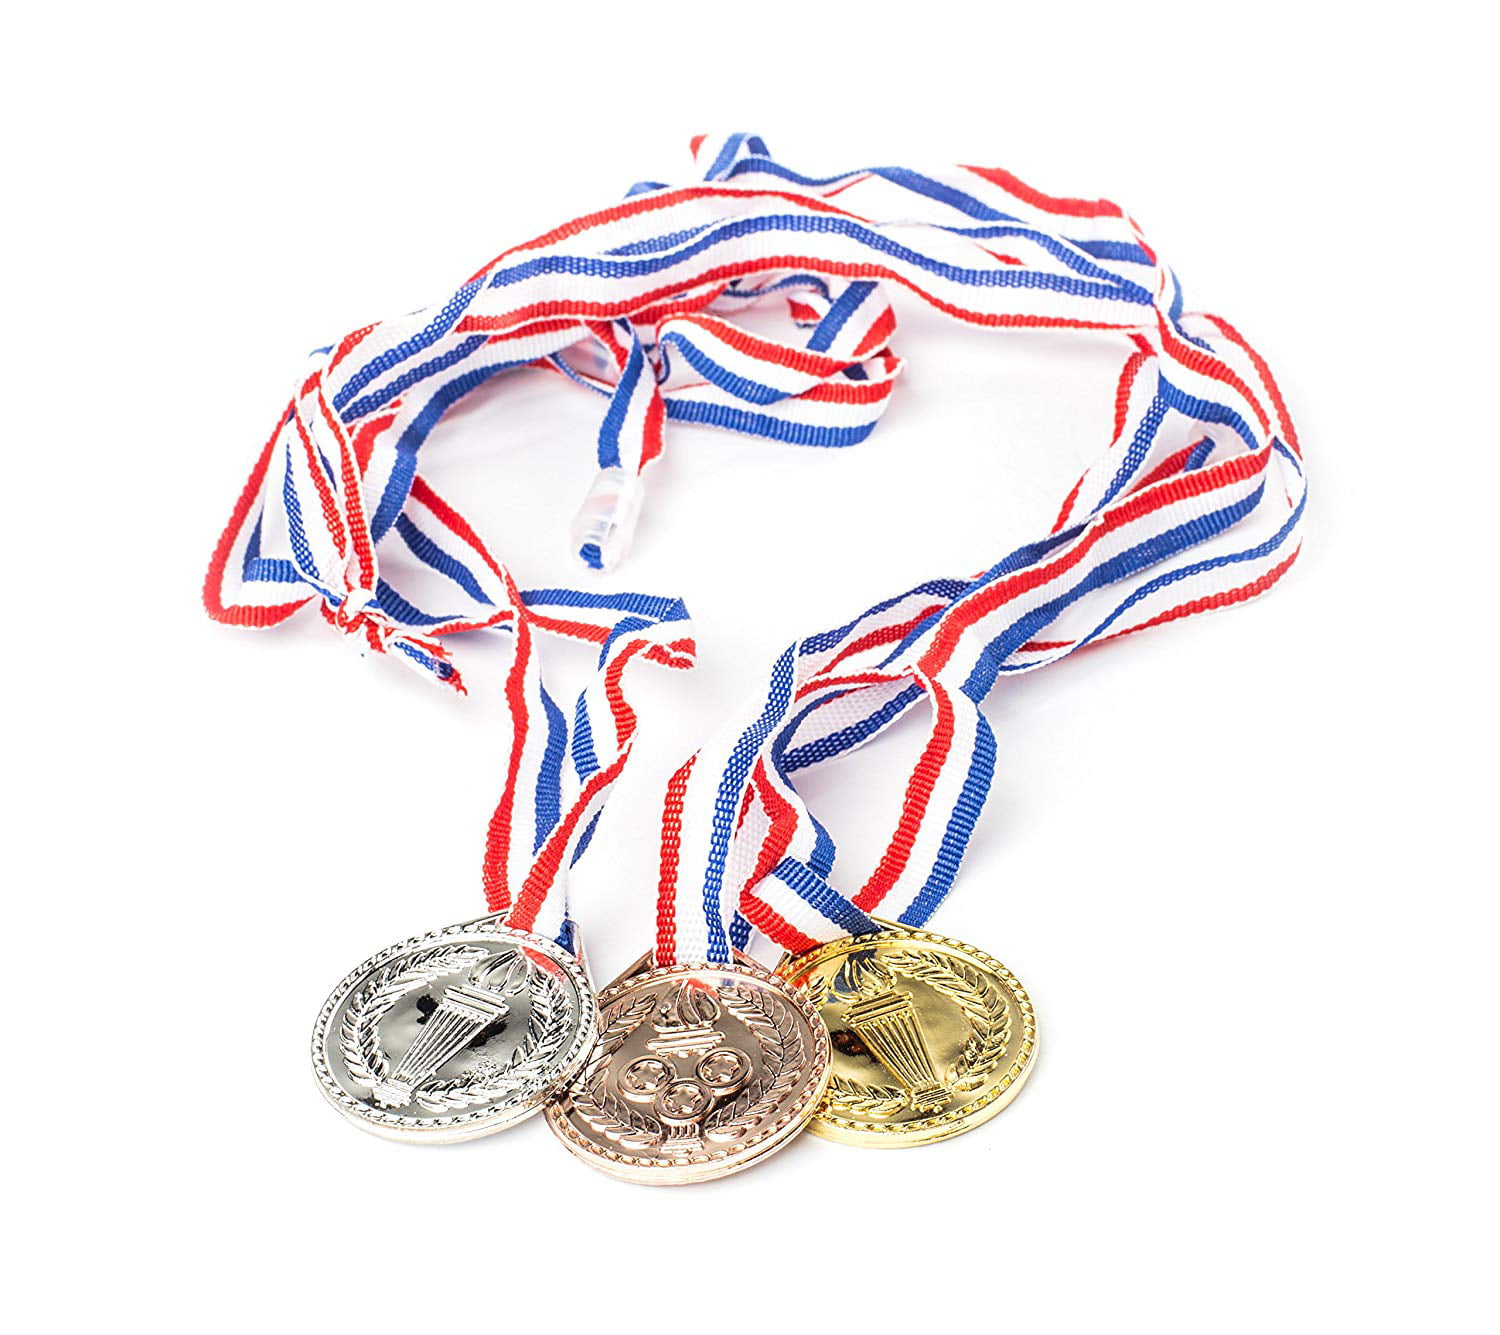 First Second Third Winner Keadic 12 Pieces Gold Silver Bronze Award Medals Olympic Style Metal Winner Medals with Neck Ribbon Bulk Great for Party Favor Decorations and Awards Ceremonies